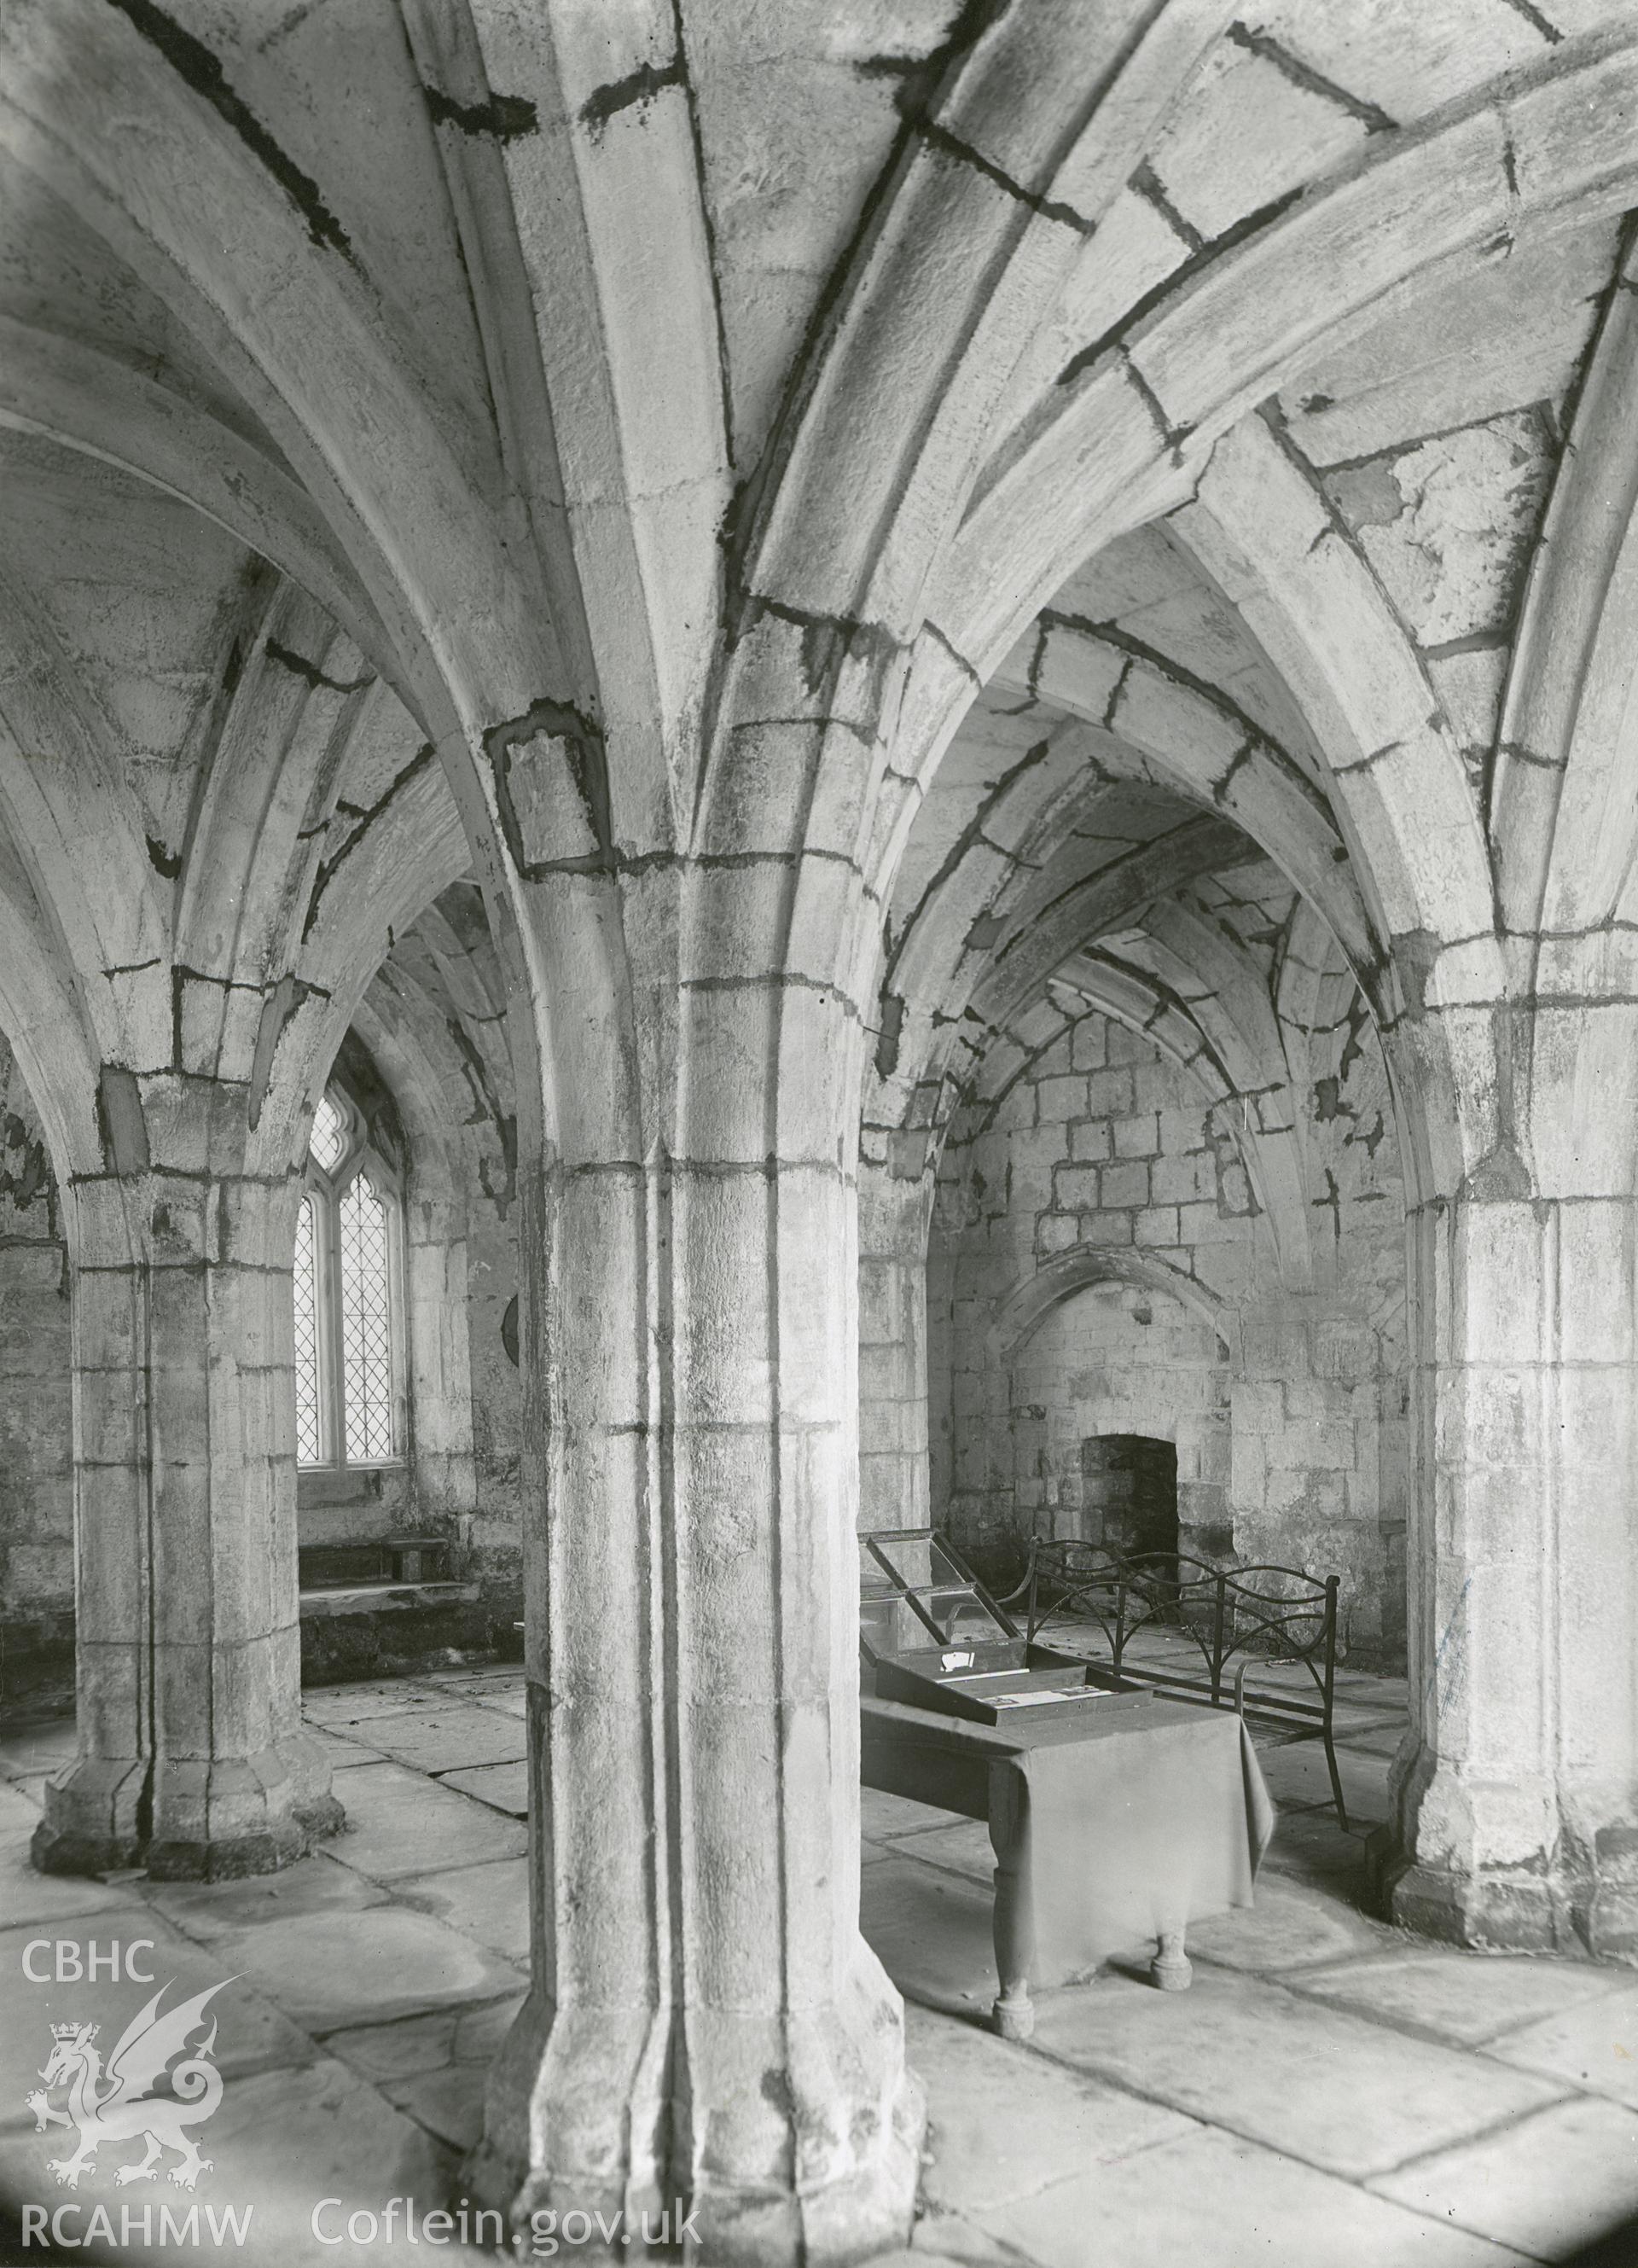 Digitised copy of a black and white print showing an interior view of the chapter house at Valle Crucis Abbey taken by F.H. Crossley, 1947. Negative held by NMR England.